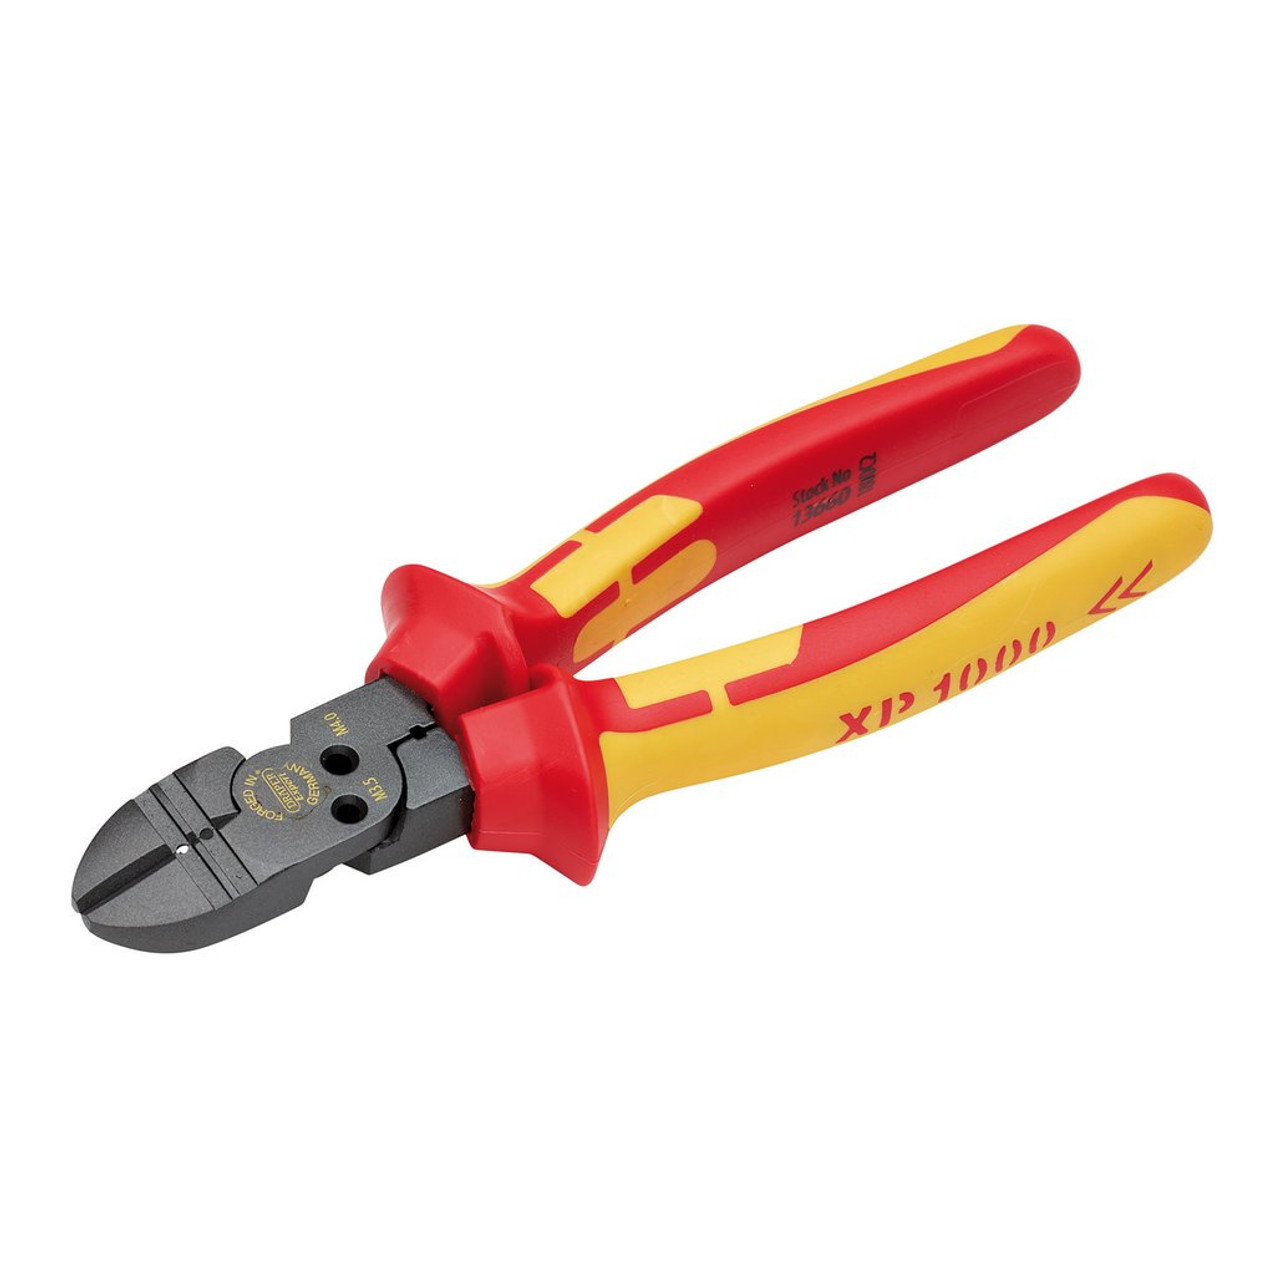 XP1000® VDE 4-in-1 Combination Cutter, 180mm